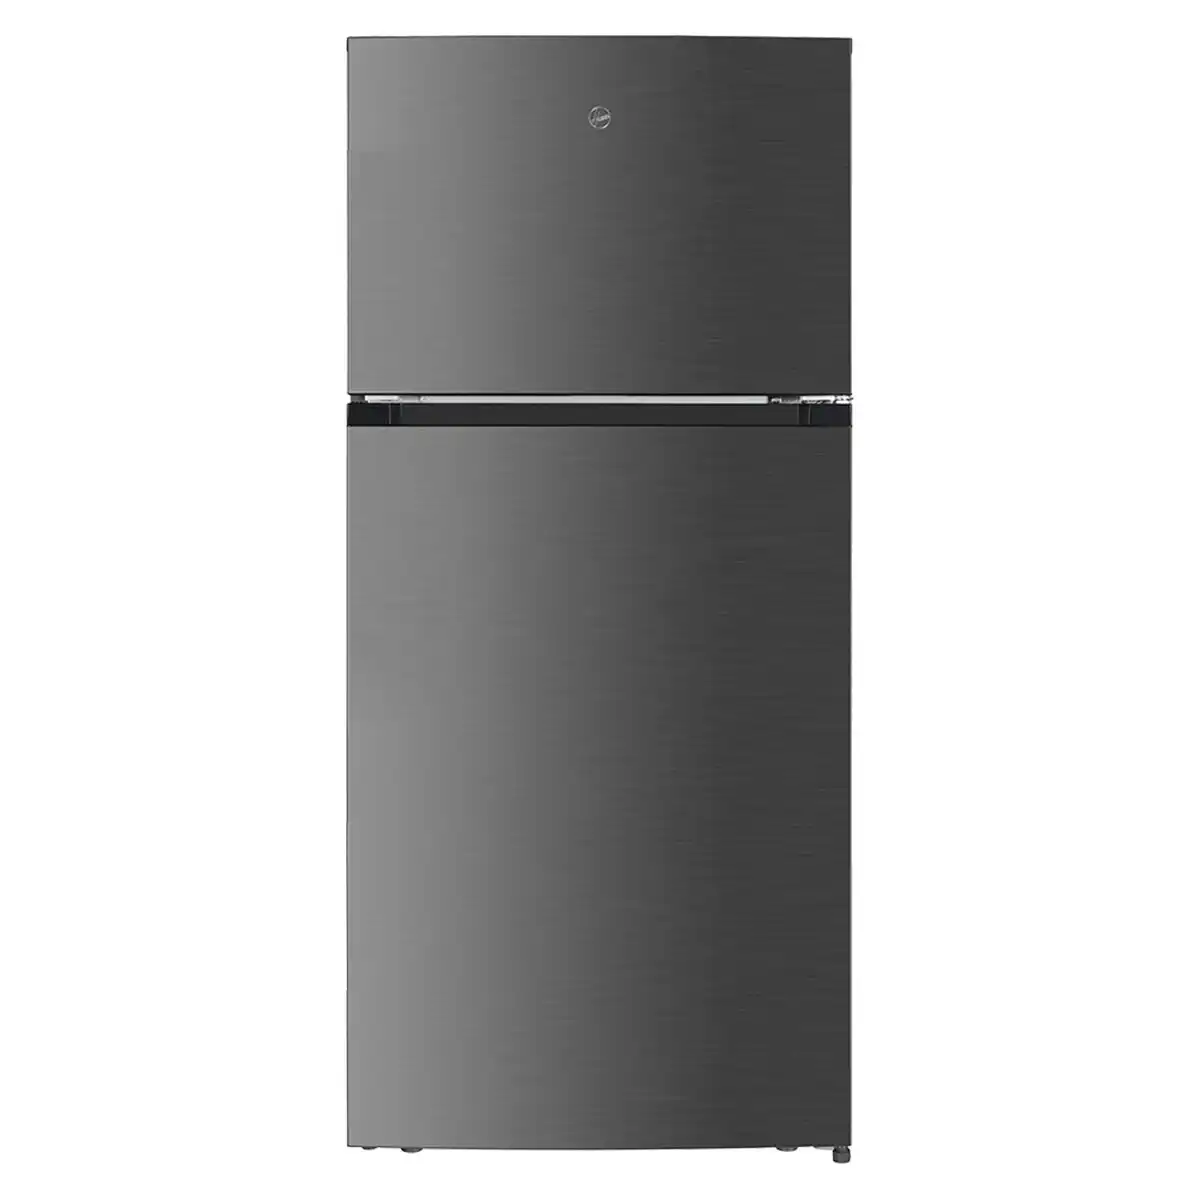 Hoover 480L Top Mount Refrigerator Stainless Steel